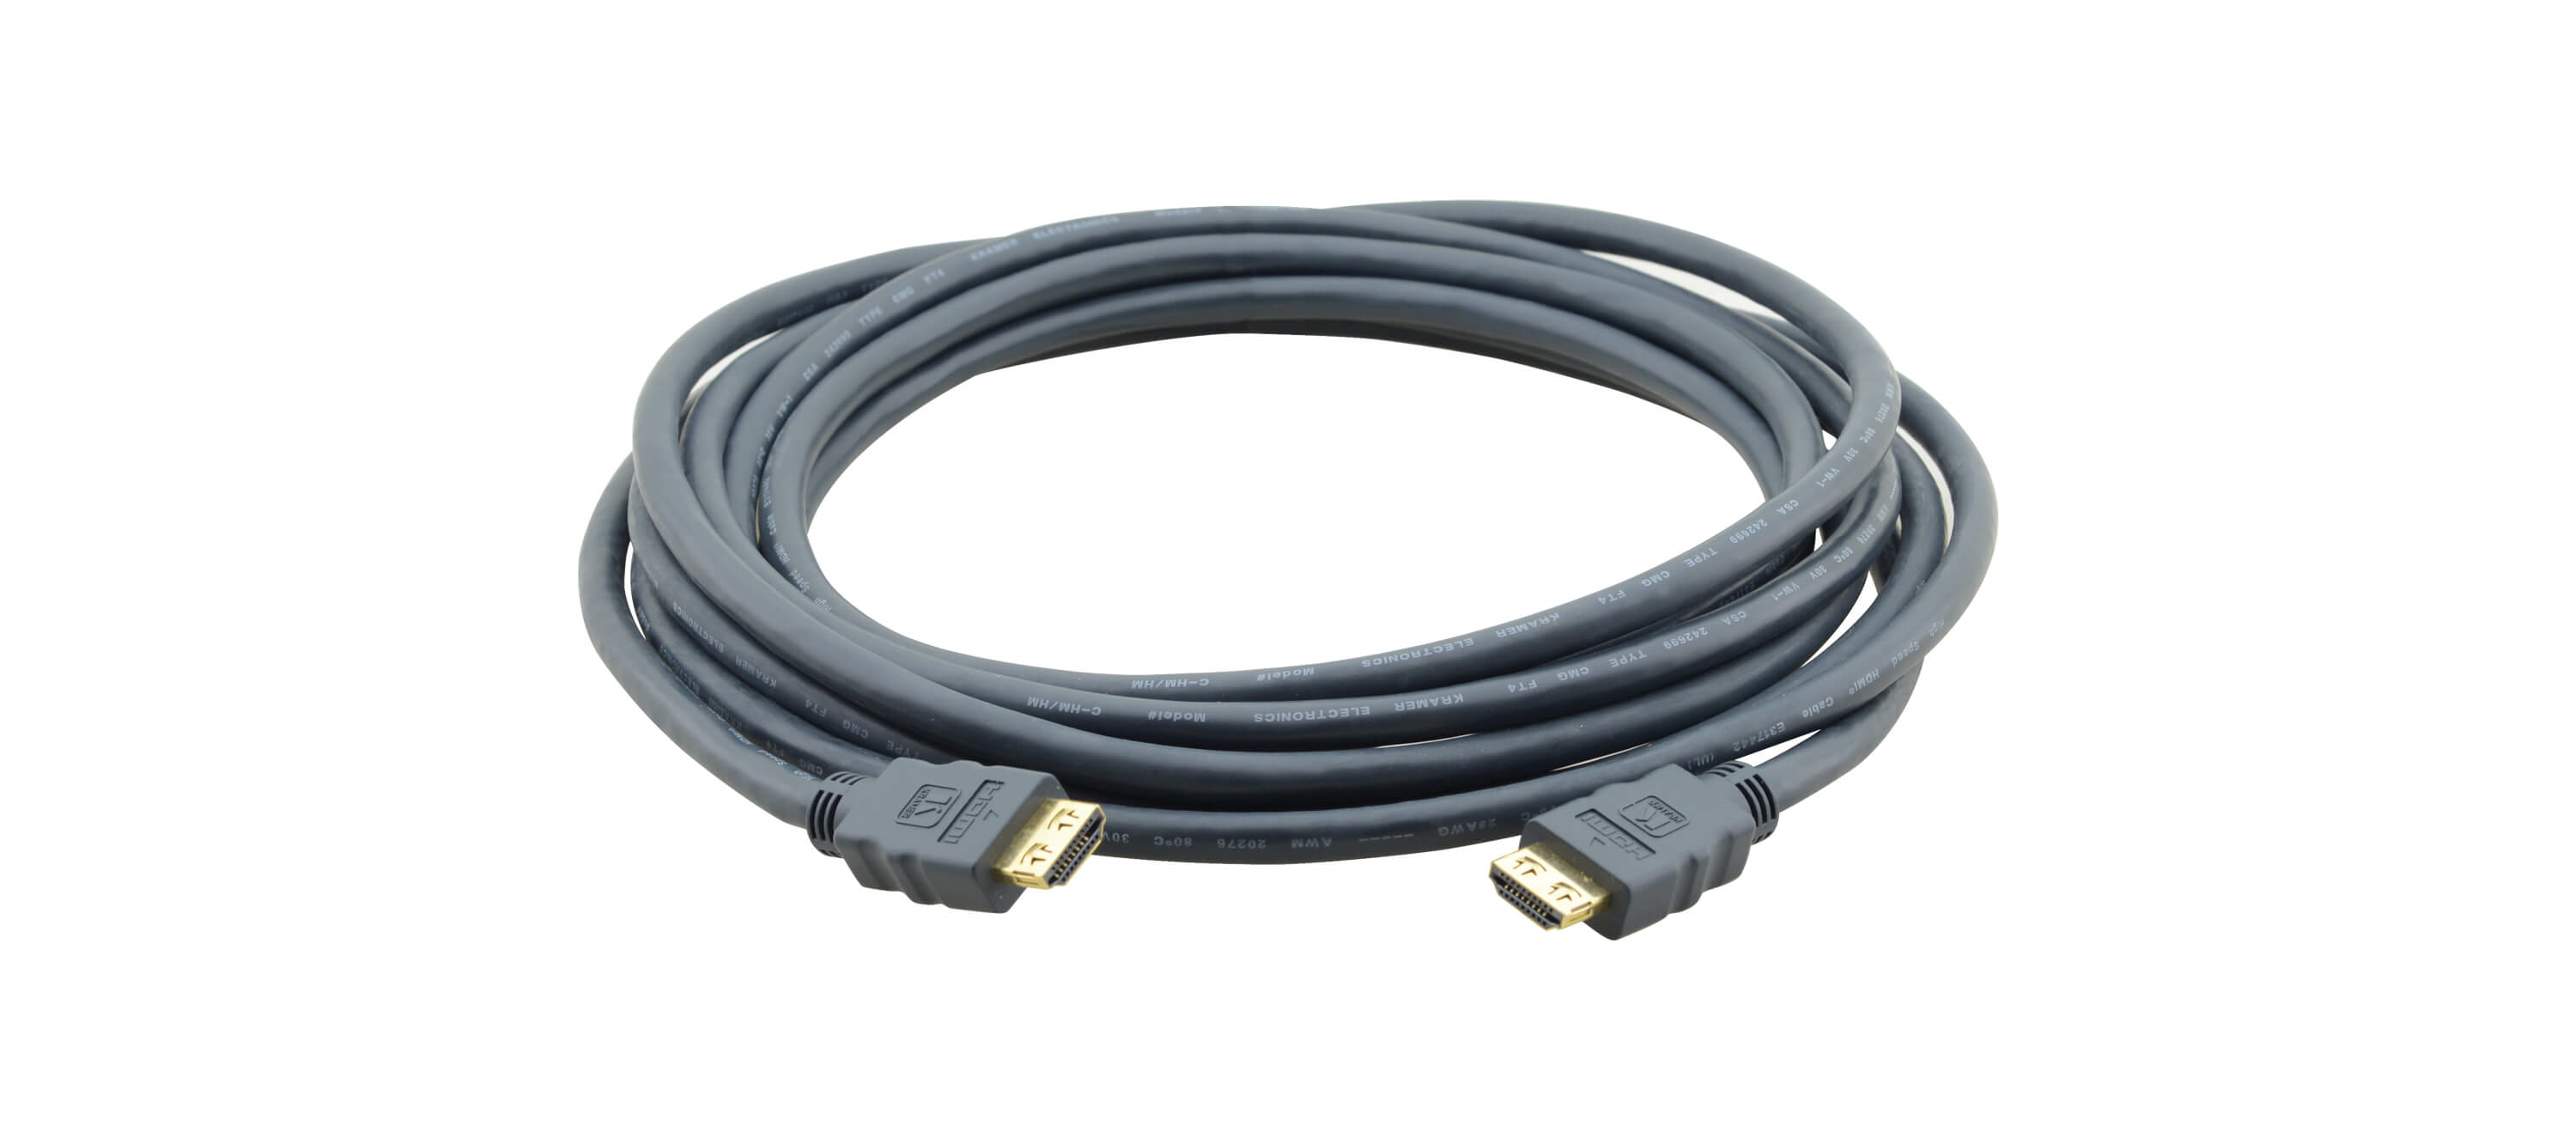 C-HM/HM/ETH-3 High–Speed HDMI Cable with Ethernet - 3'